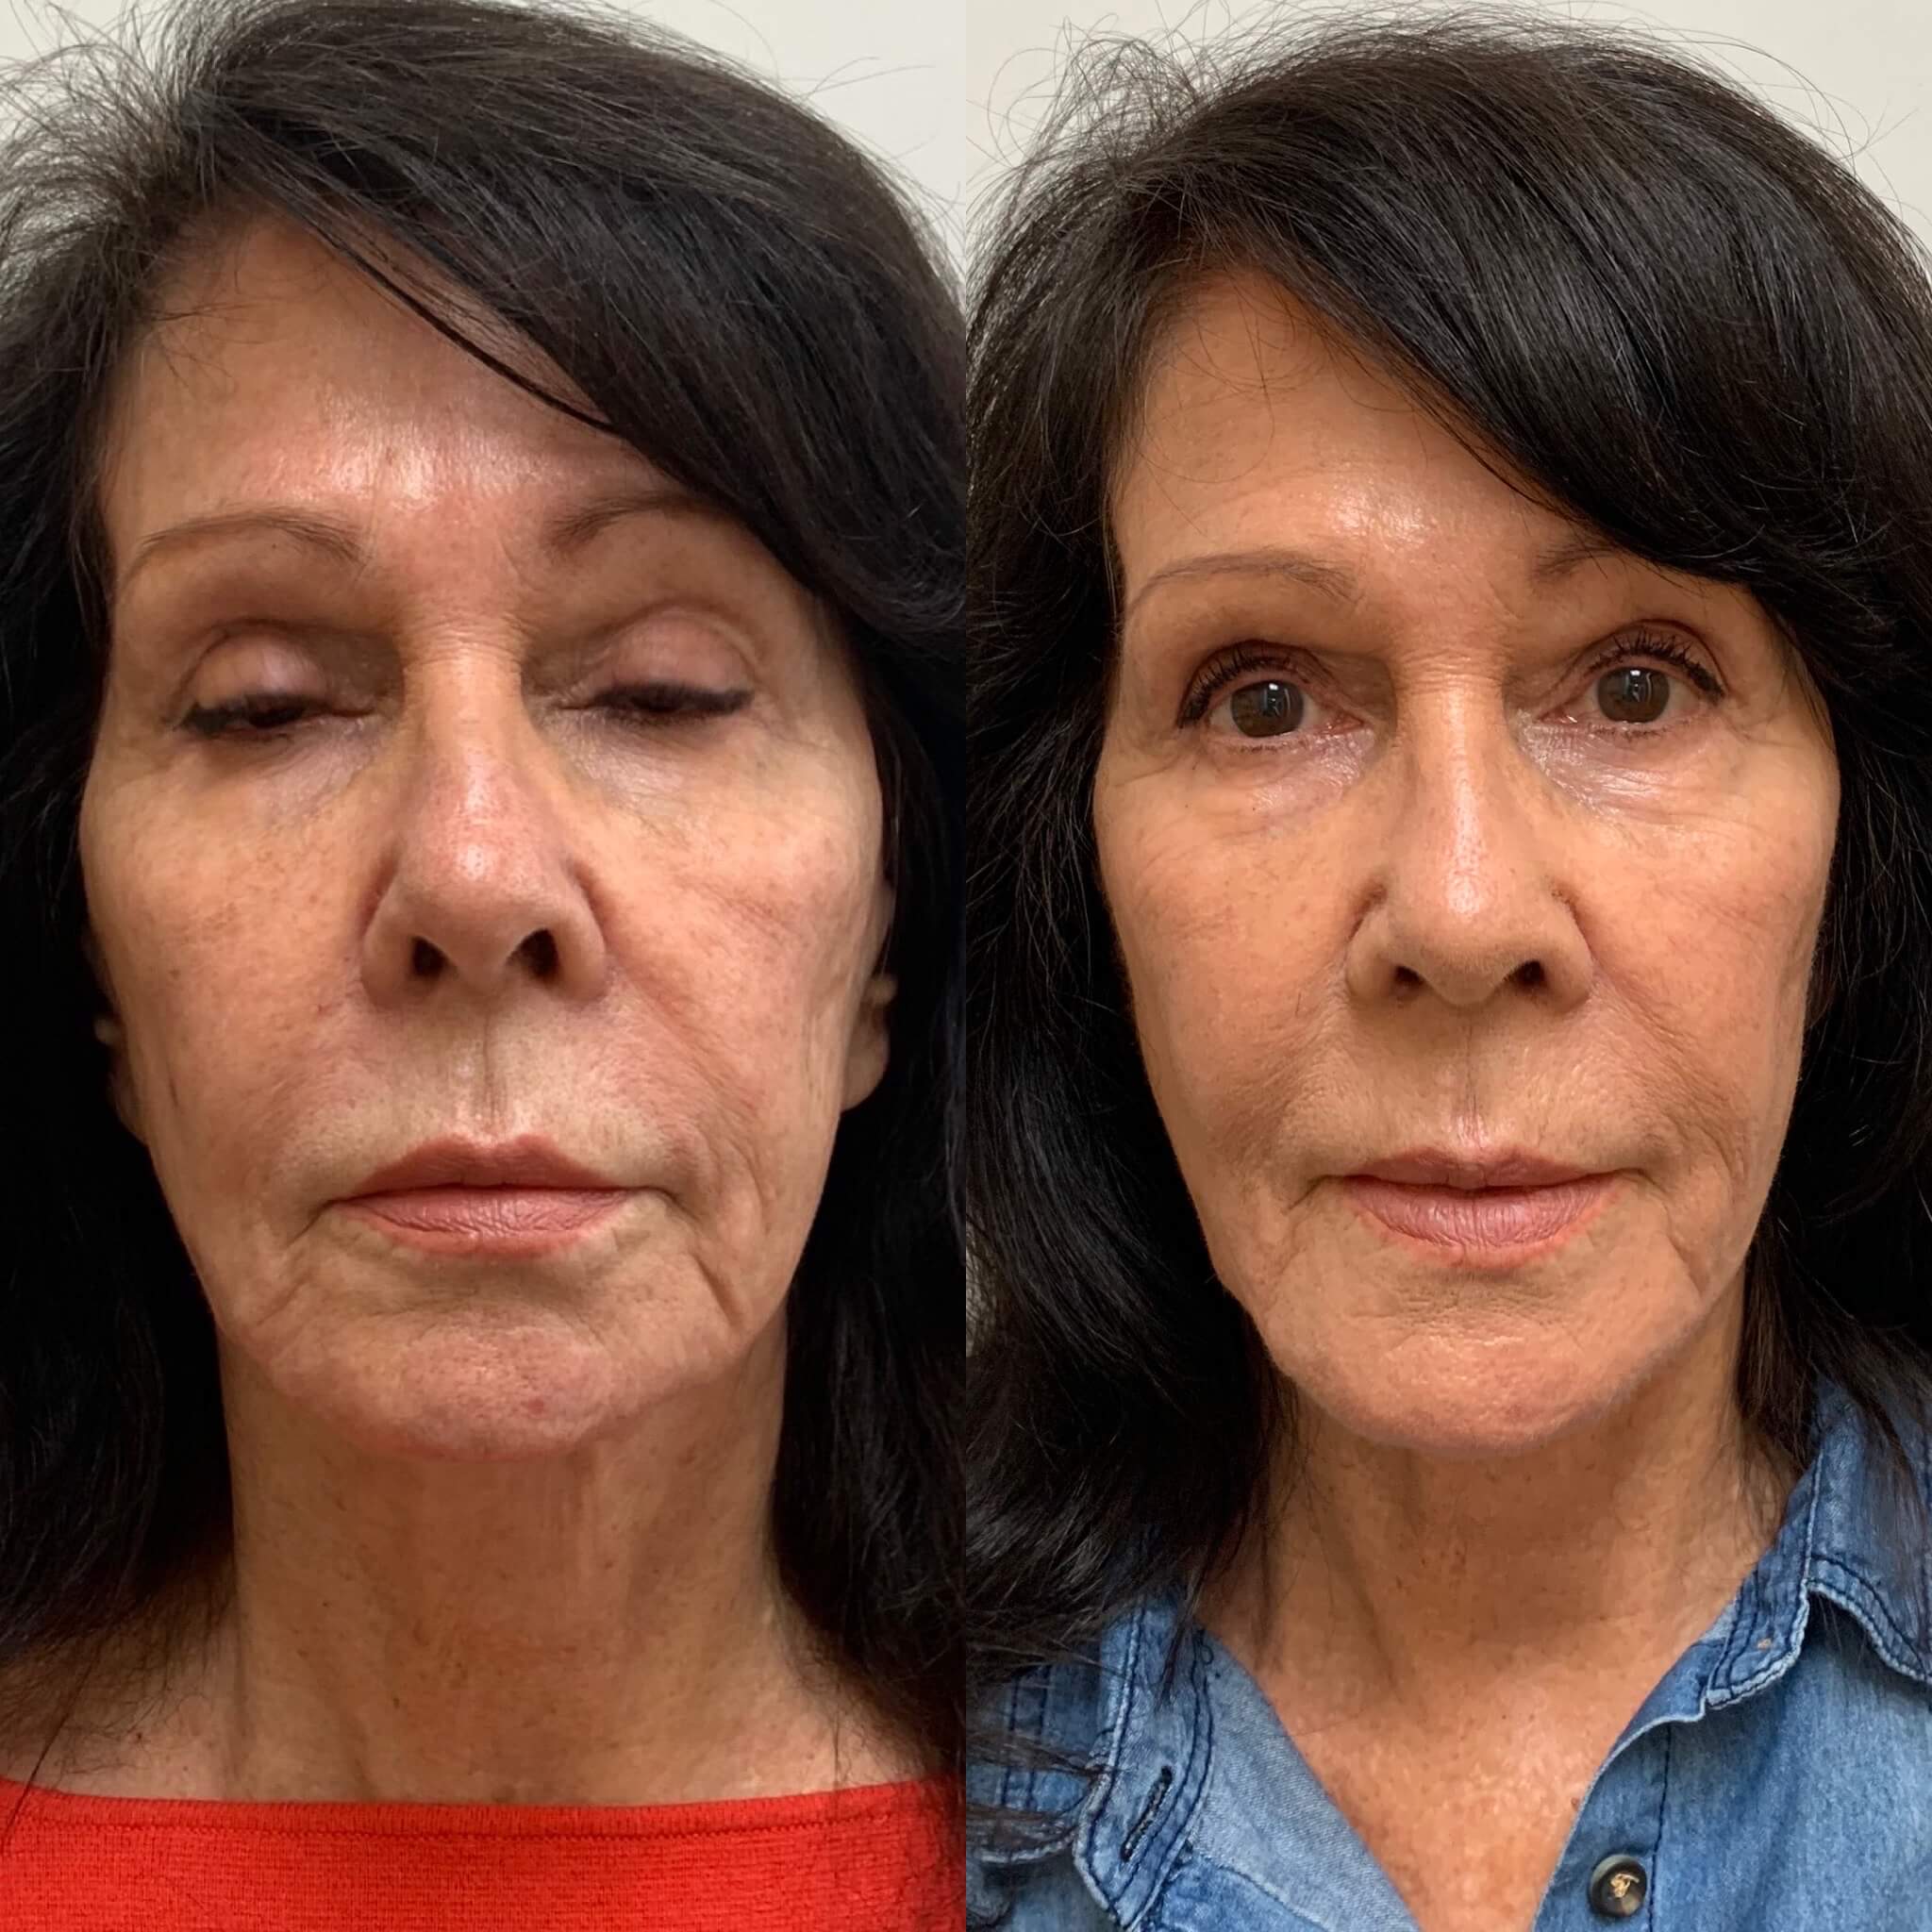 Before and After Sculptra treatment | Beauty Boost Med Spa at Newport Beach, CA